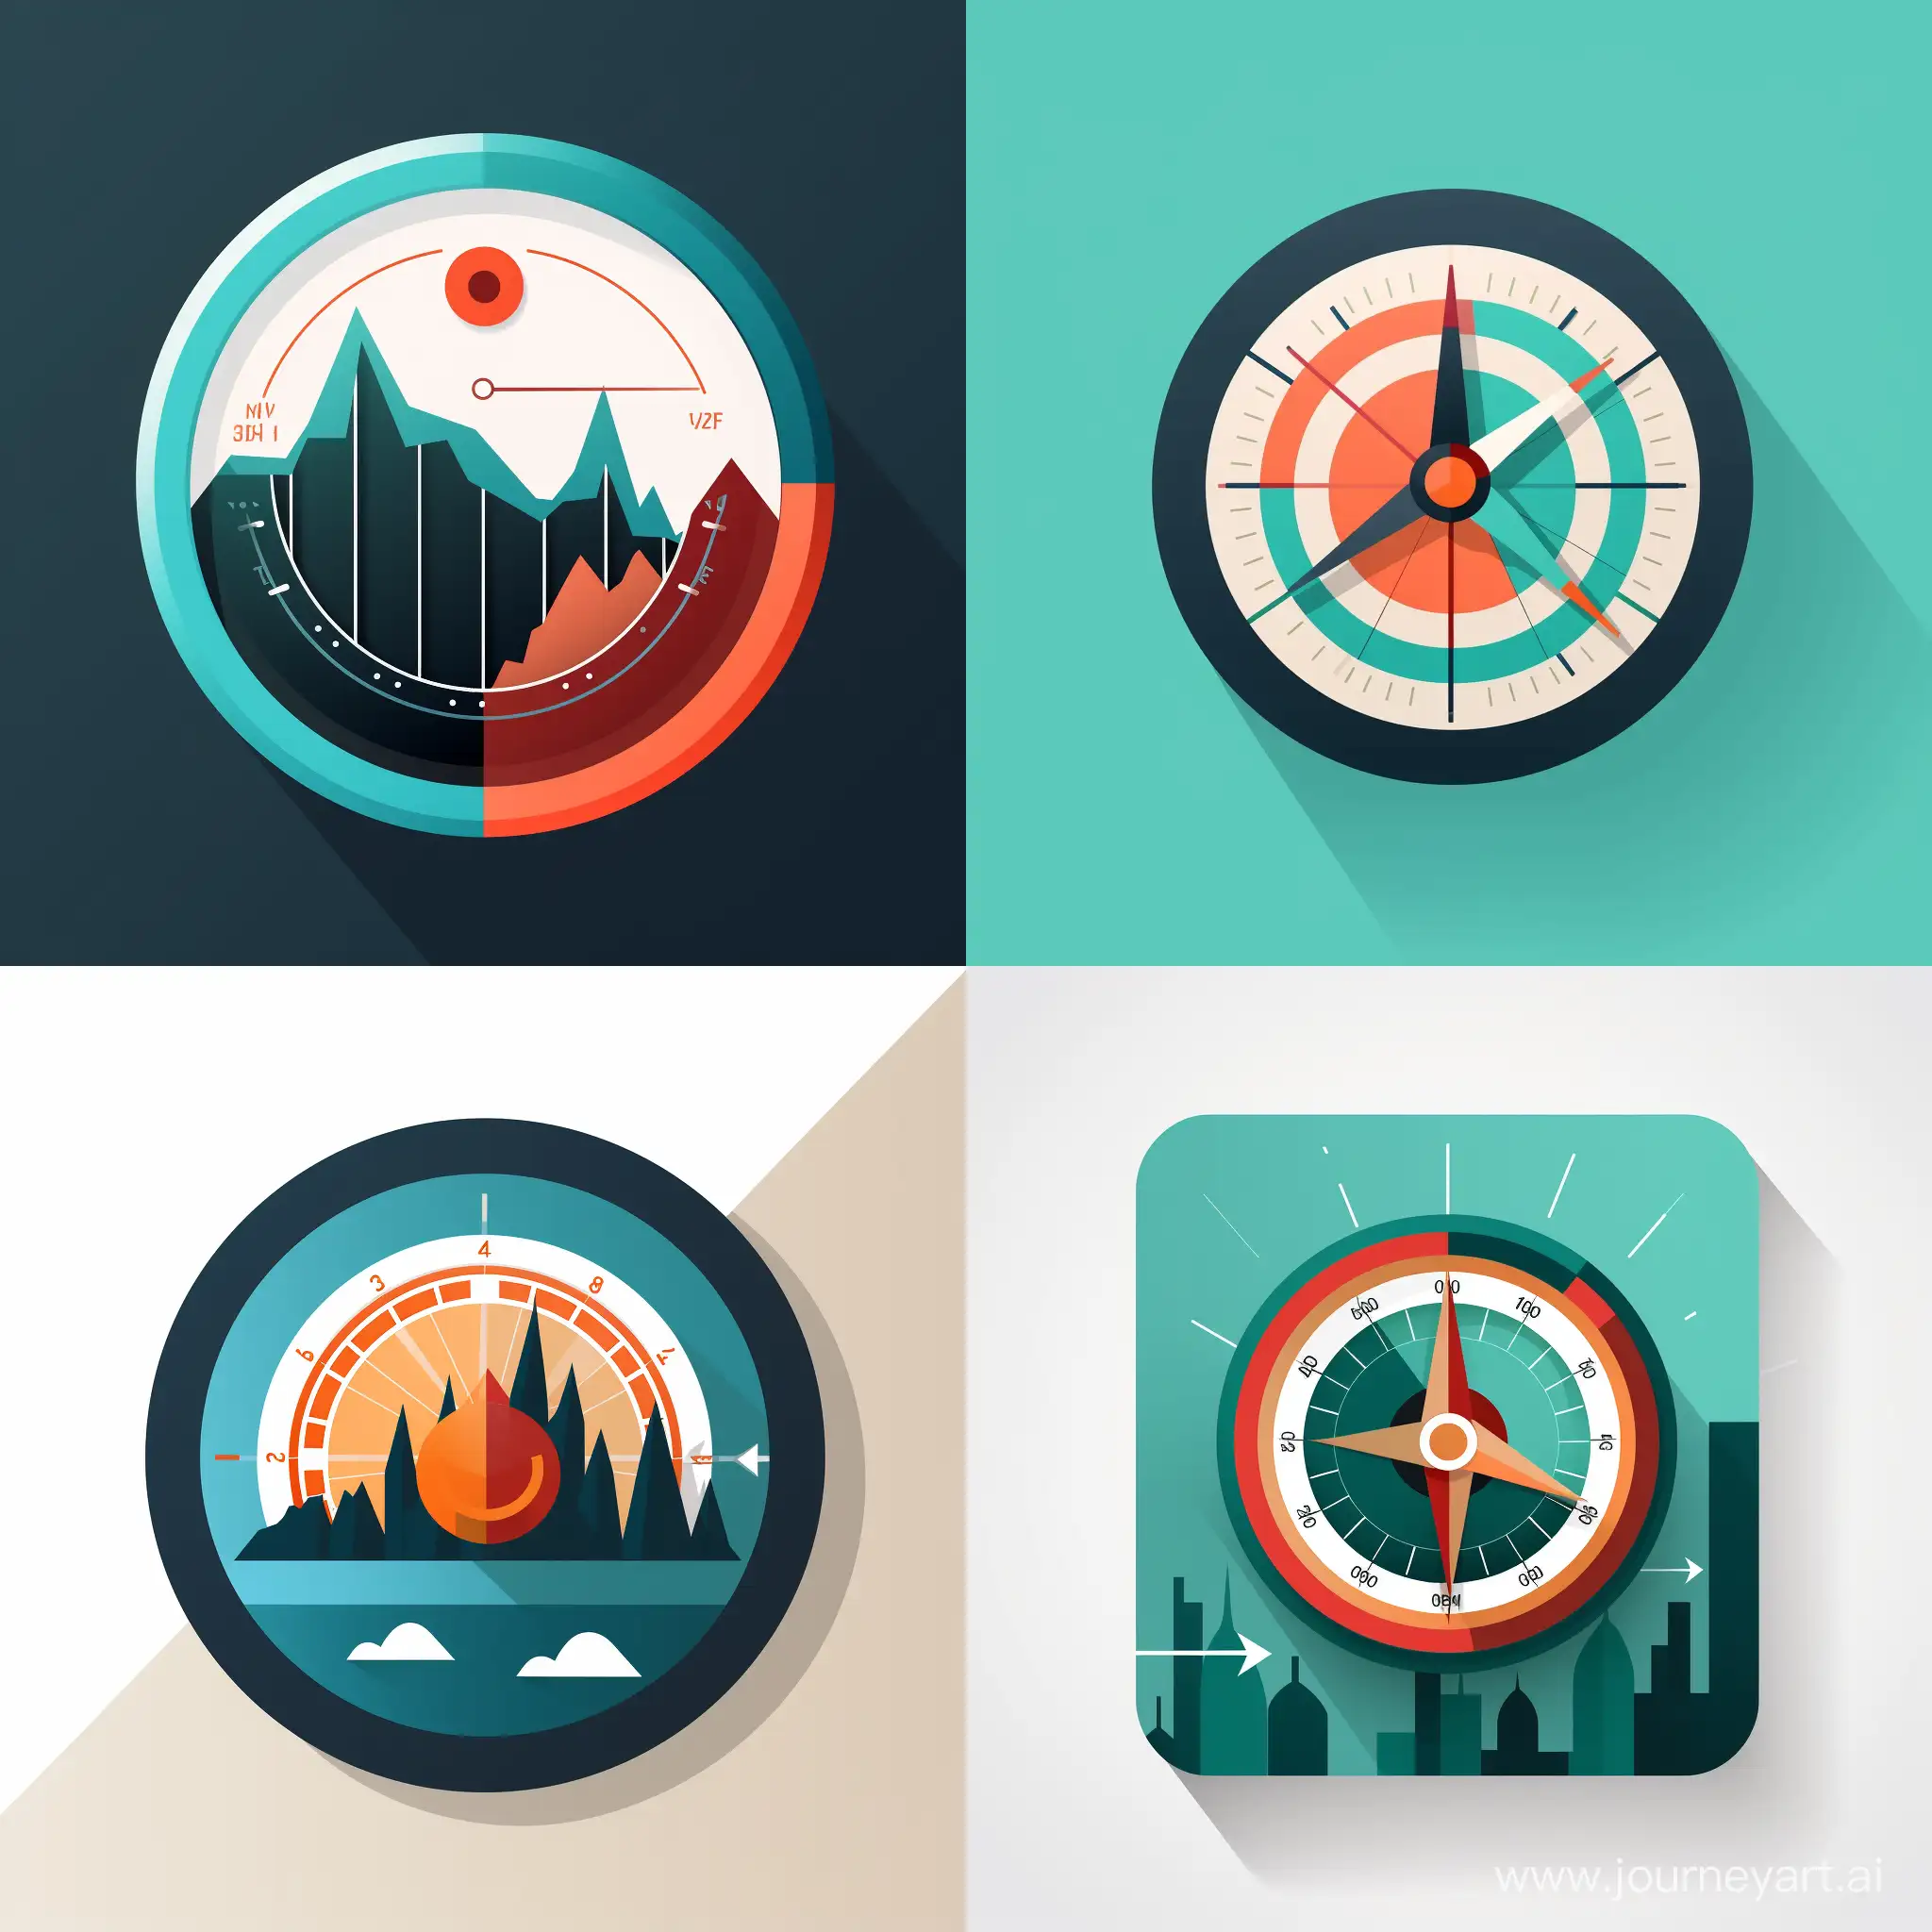 Design a flat vector mobile app icon with a stylized a modern compass icon, where the directional needle is replaced with a stylized line graph. This design symbolizes financial navigation and skillful investing. The line graph signifies the path of smart investments, guiding users toward financial success with a sense of precision and strategy.